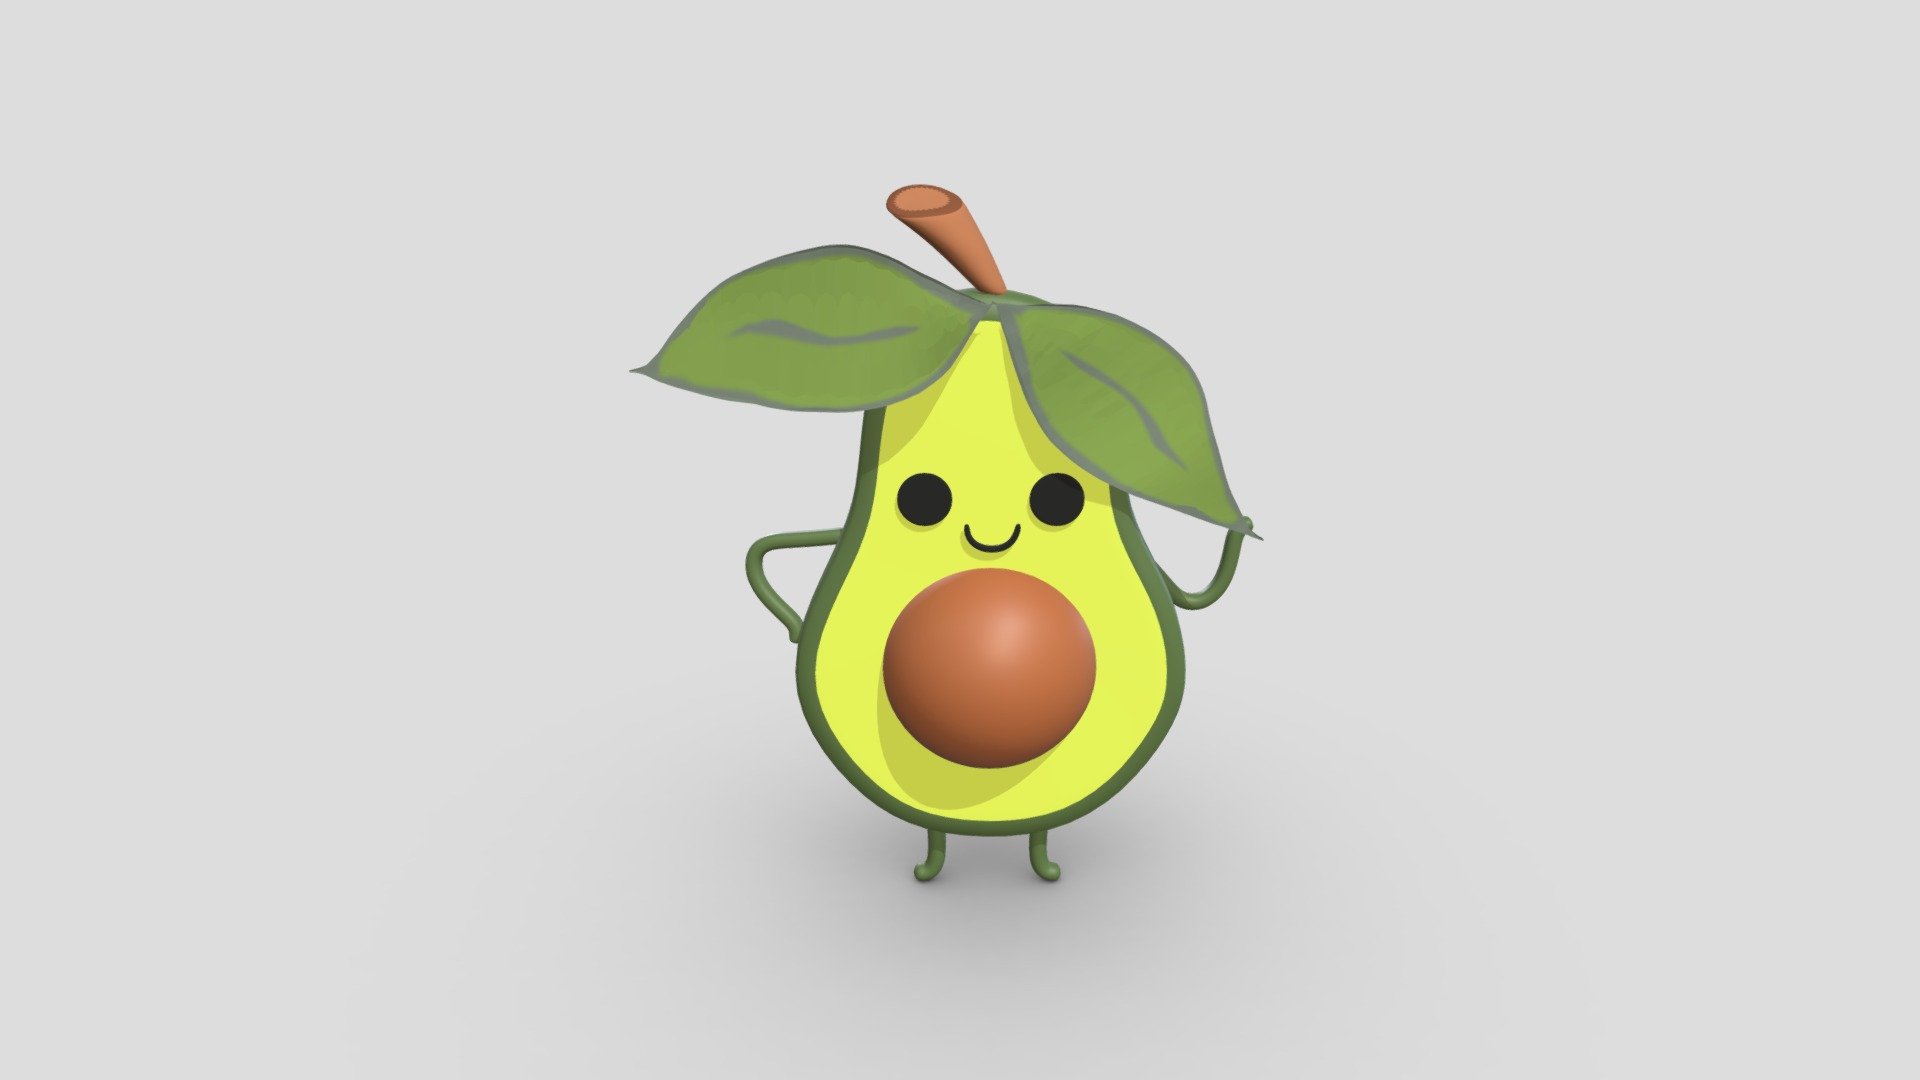 Aaaww!! What is it with this avocado that you just don't wanna eat it!?

Such a cutie!!

Made in Blender 3d model